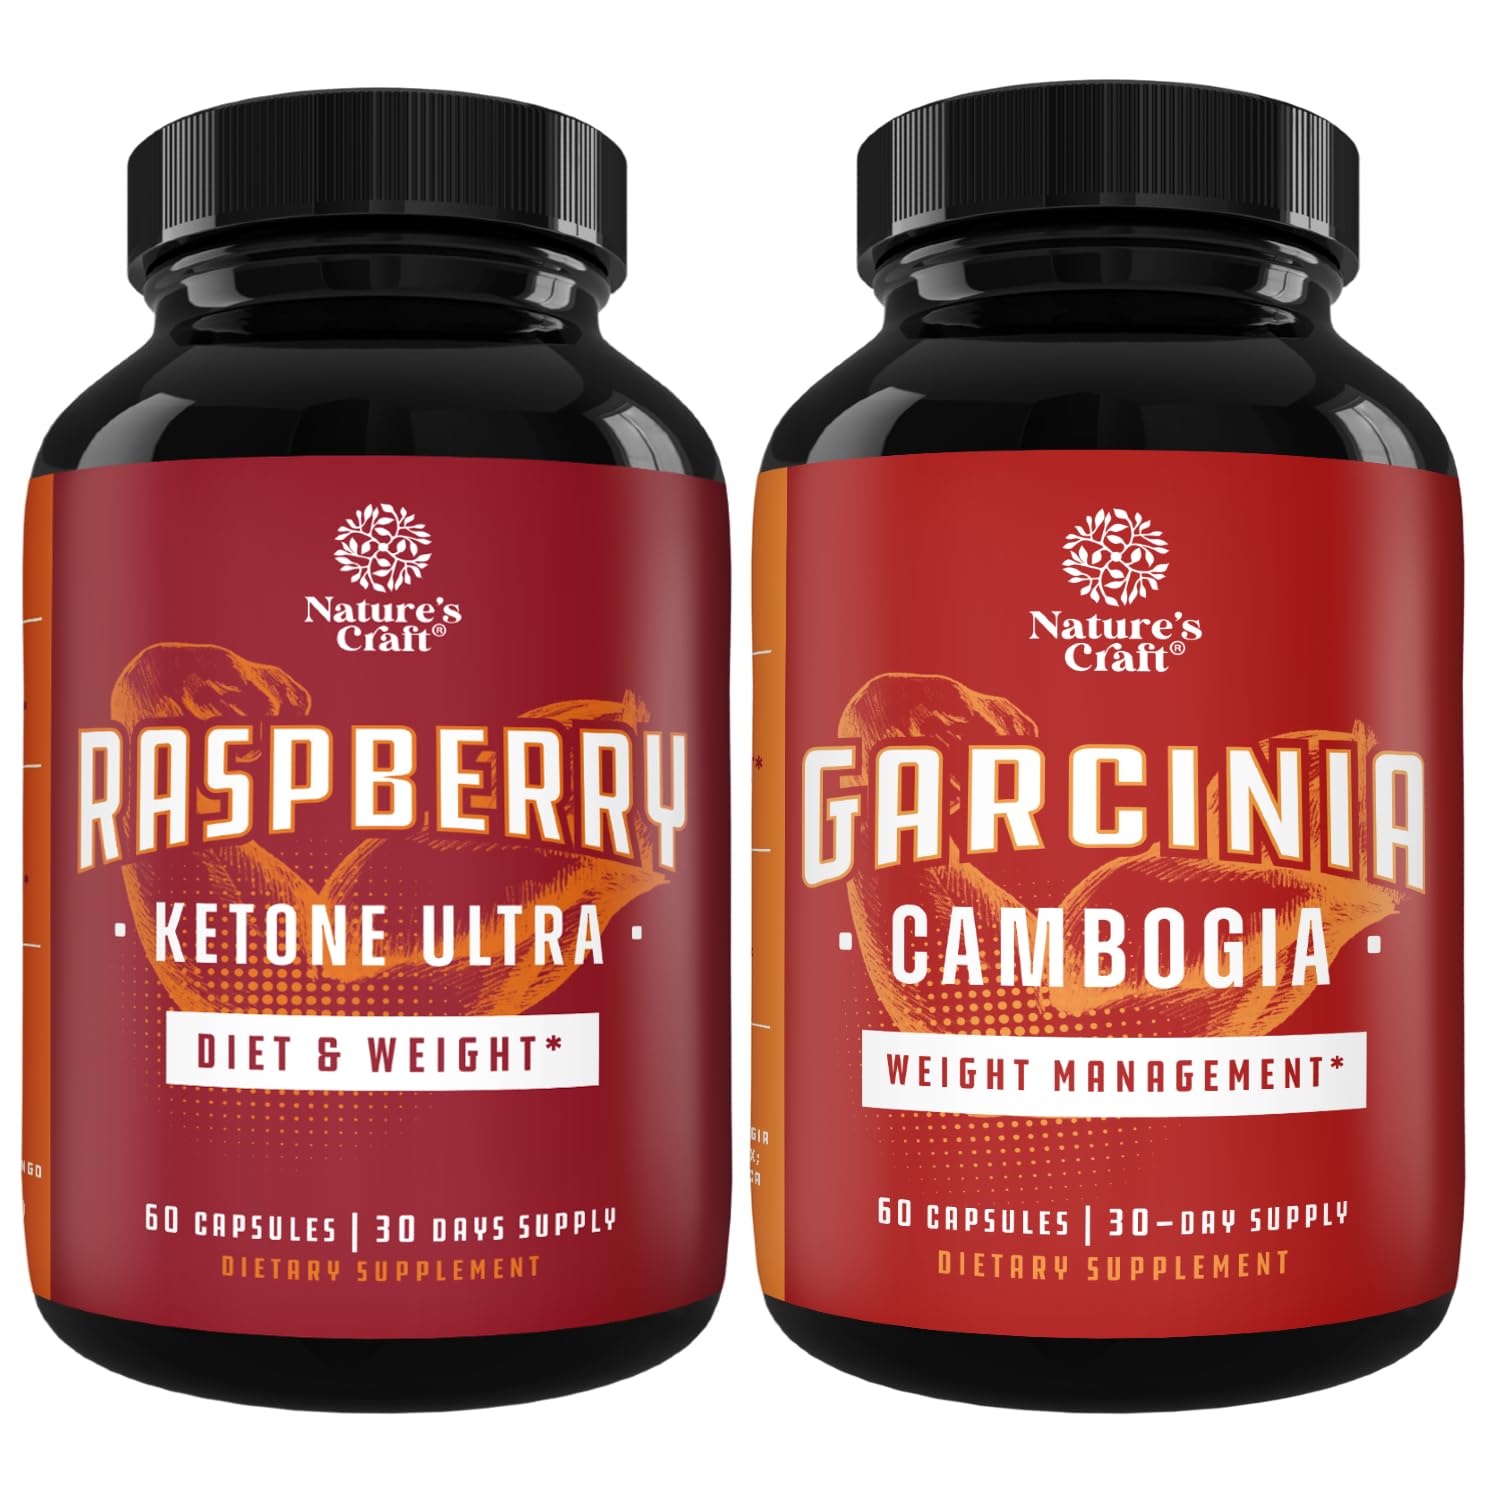 Bundle of Raspberry Ketones, Green Tea Extract and African Mango Blend and Pure Garcinia Cambogia Weight Loss Pills 95% HCA - Suppress Appetite & Burn Fat - Energy and Diet Pills for Women and Men